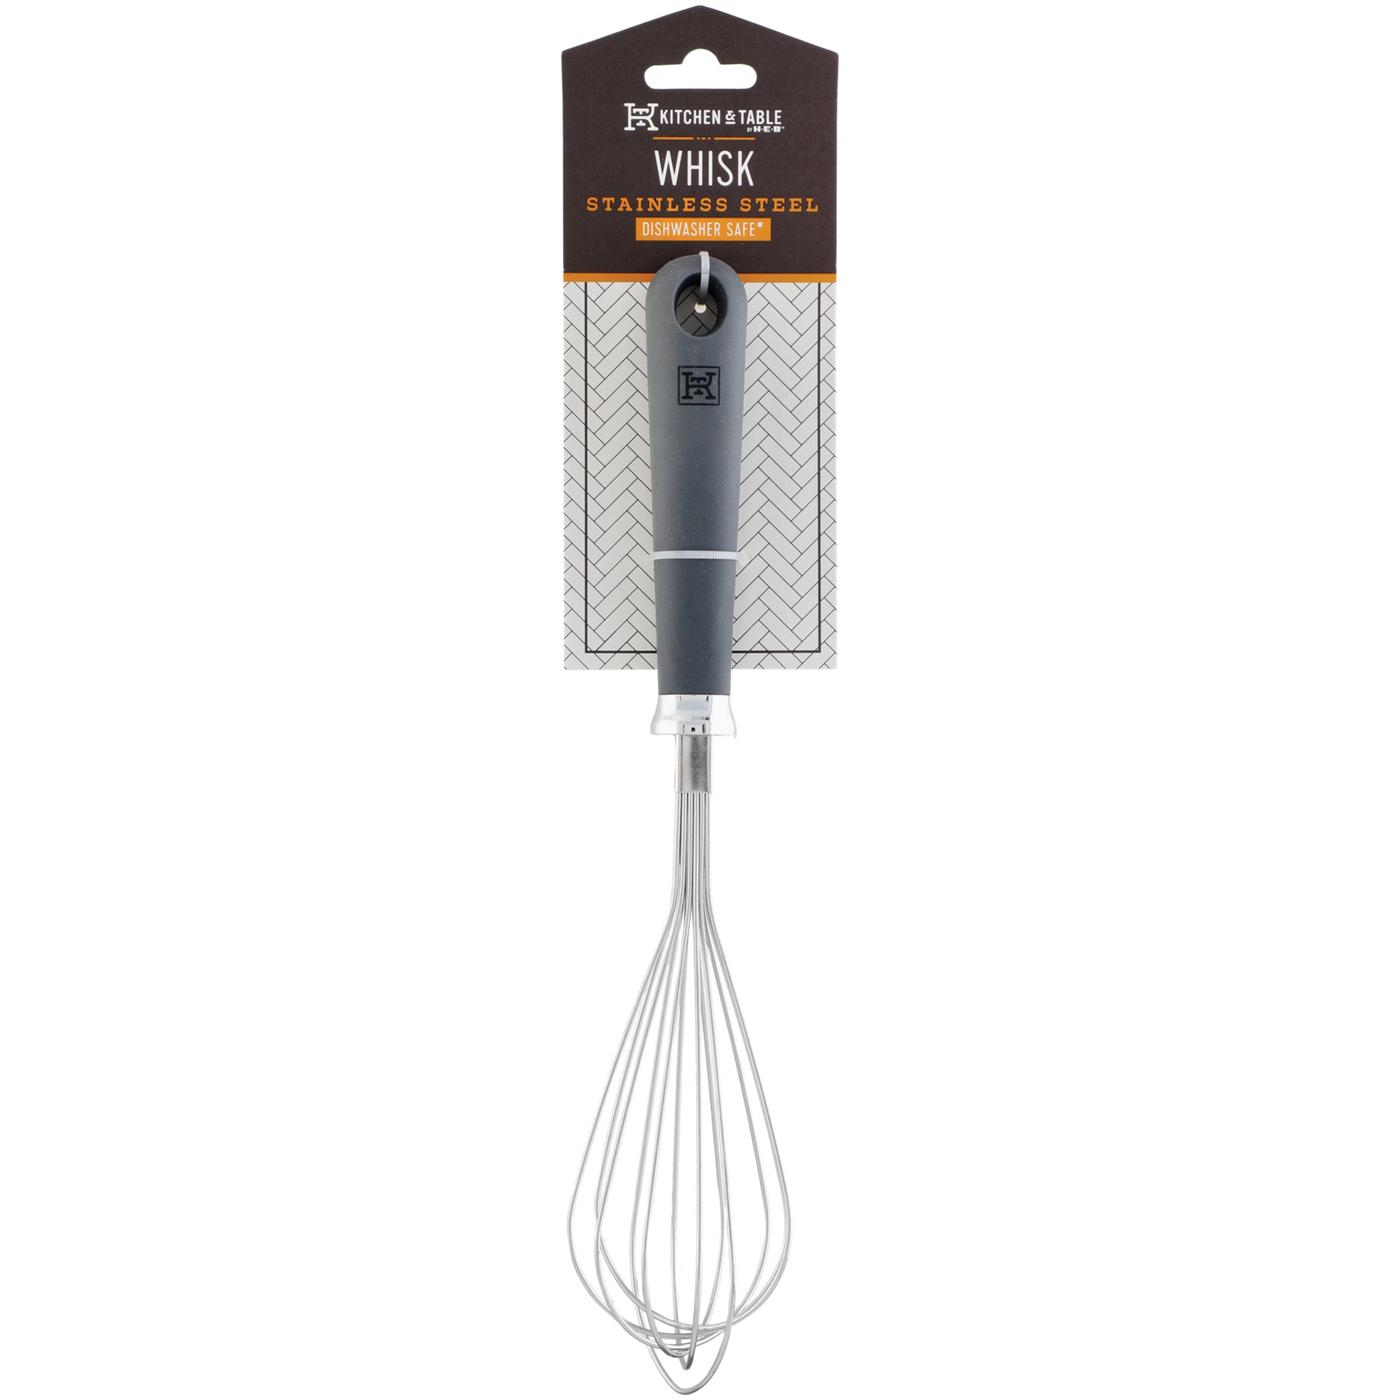 Kitchen & Table by H-E-B Stainless Steel Whisk; image 1 of 2